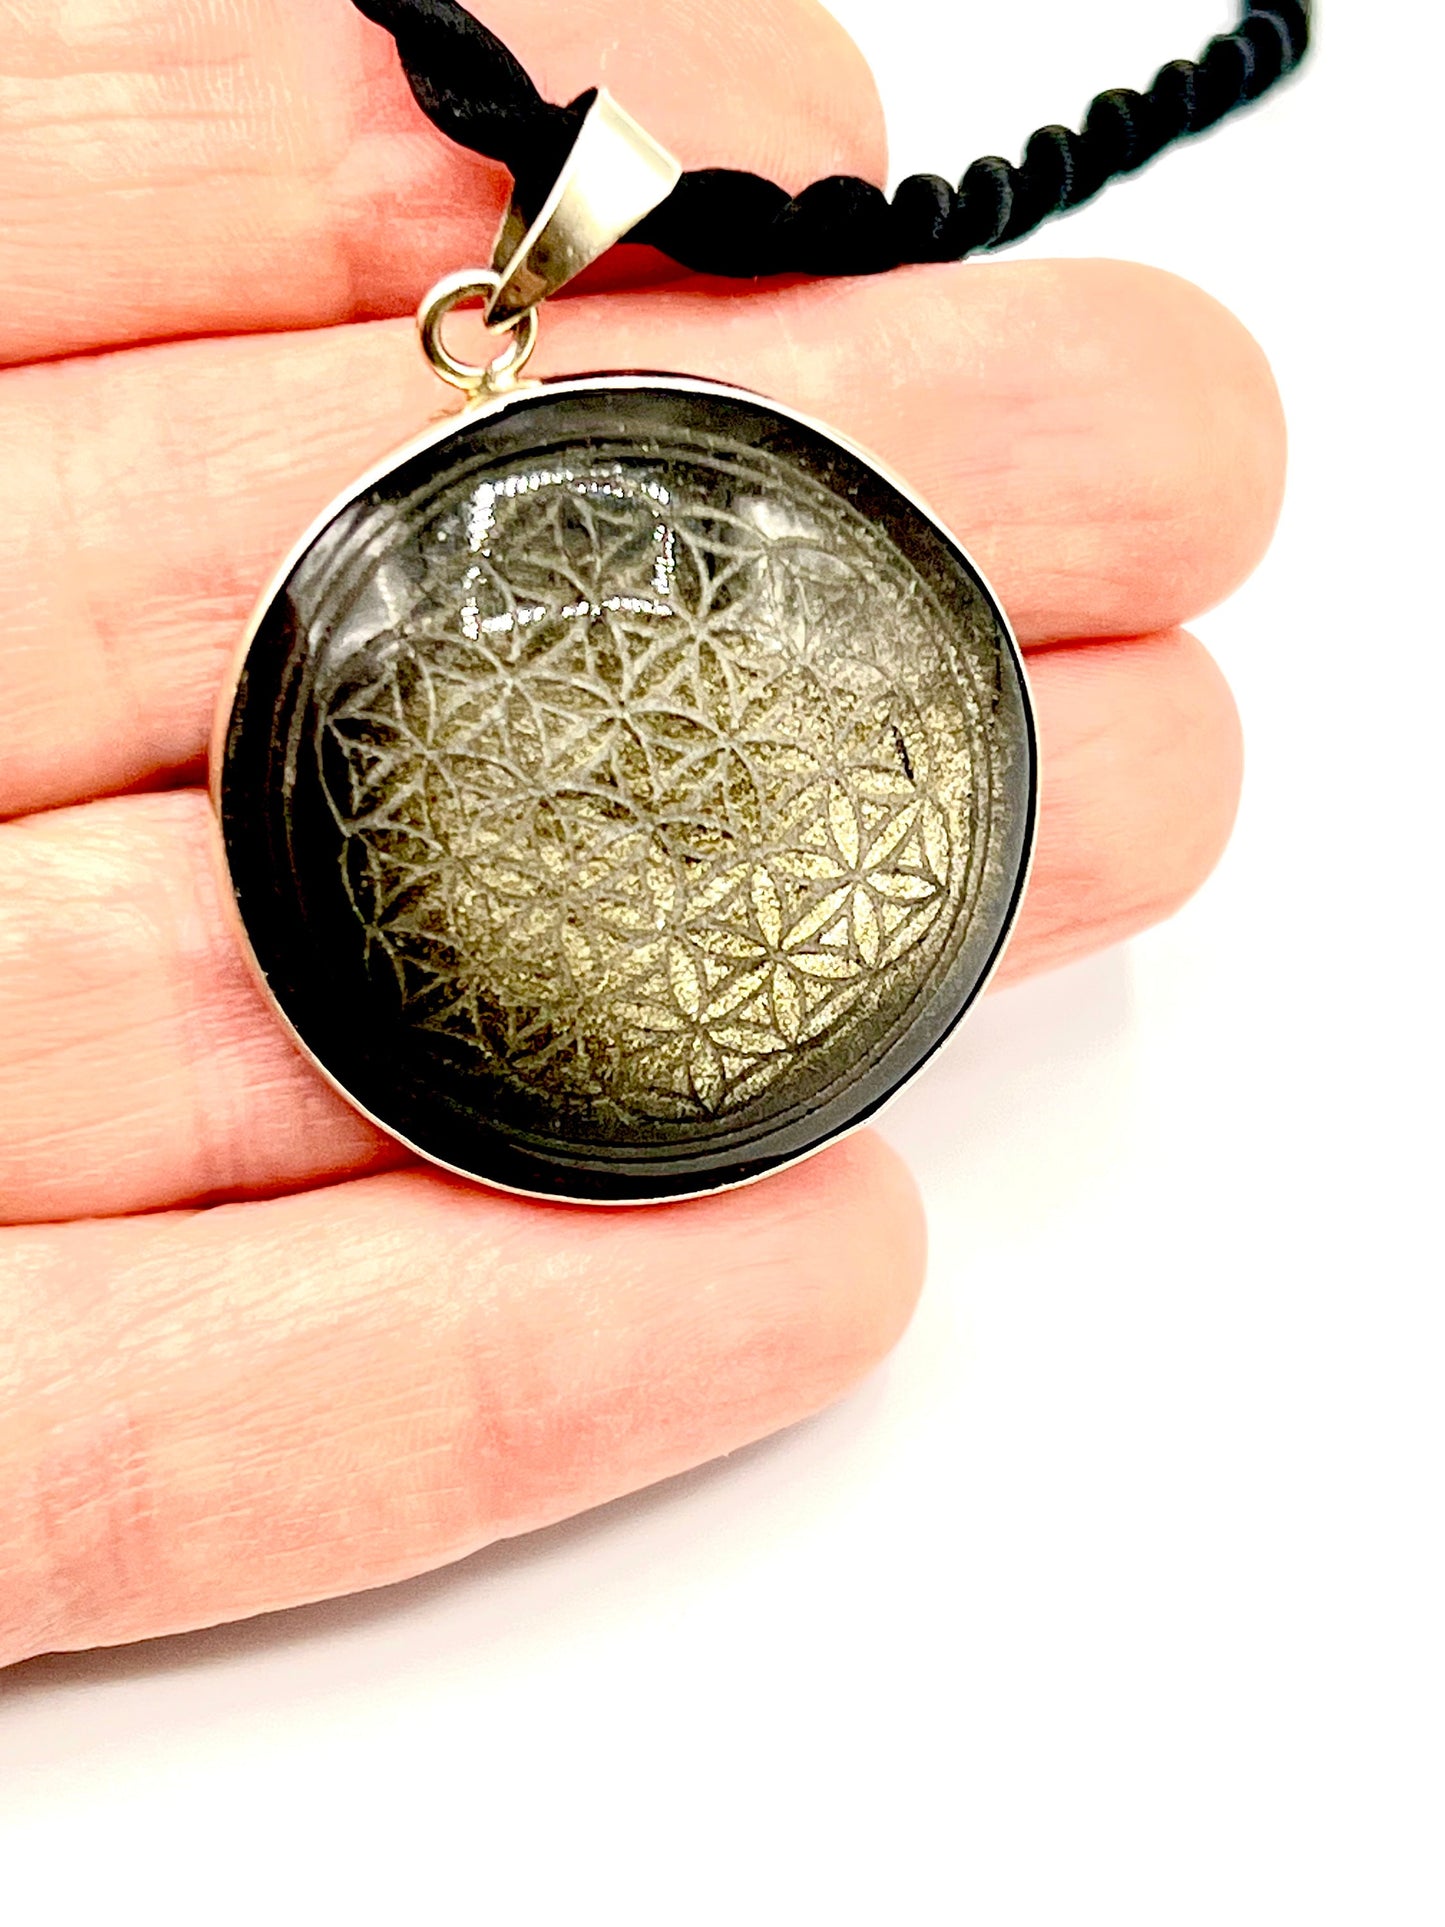 Black Obsidian Flower Of Life Pendant energy pendant necklace Sacred Geometry healing crystal jewelry